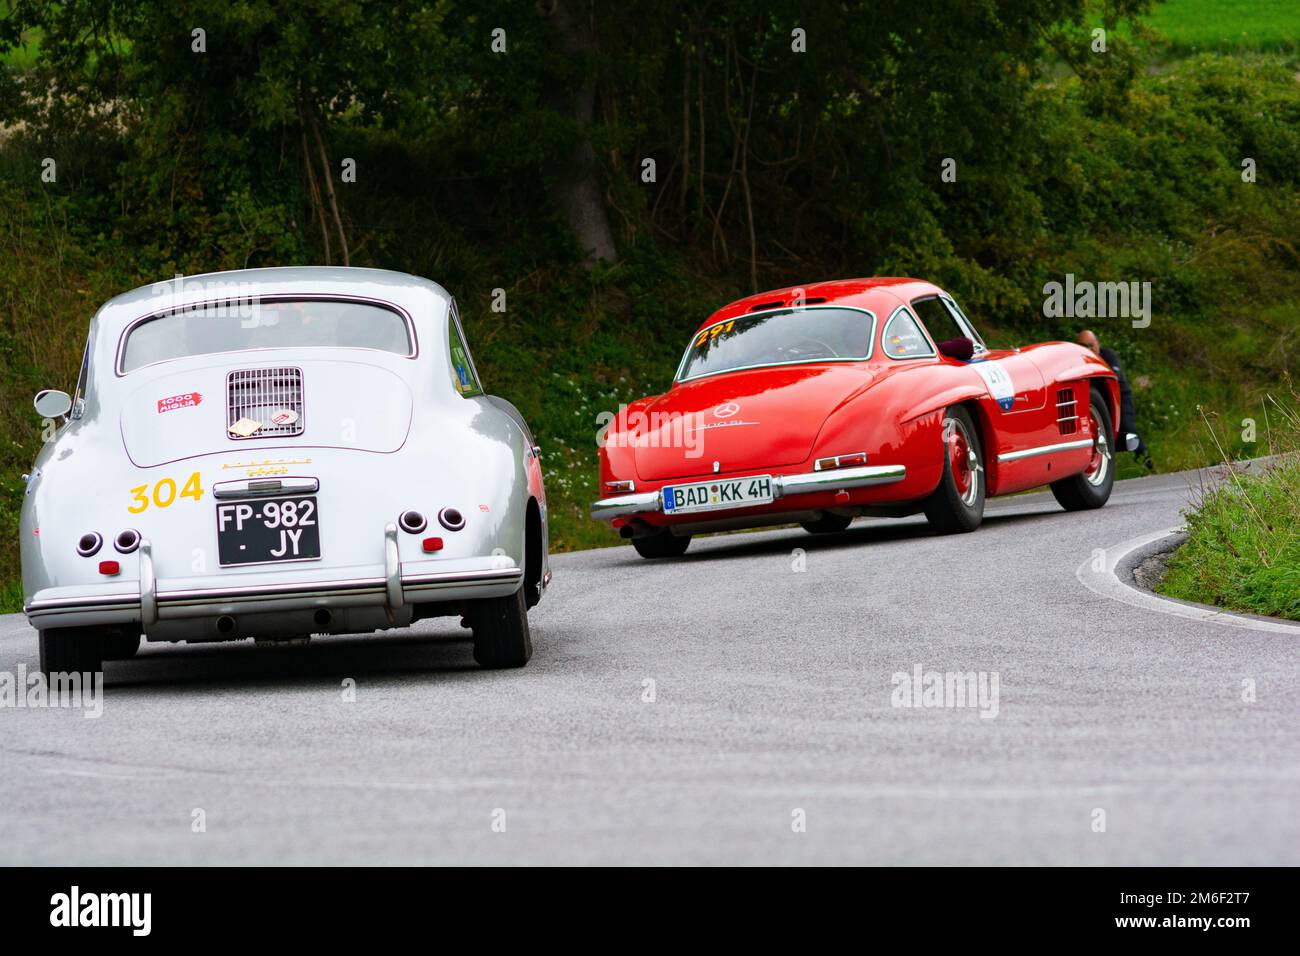 MERCEDES-BENZ 300 SL W 198 1955 PORSCHE 356 1600 COUPÃ‰ 1956 on an old racing car in rally Mille Miglia 2020 the famous italian Stock Photo